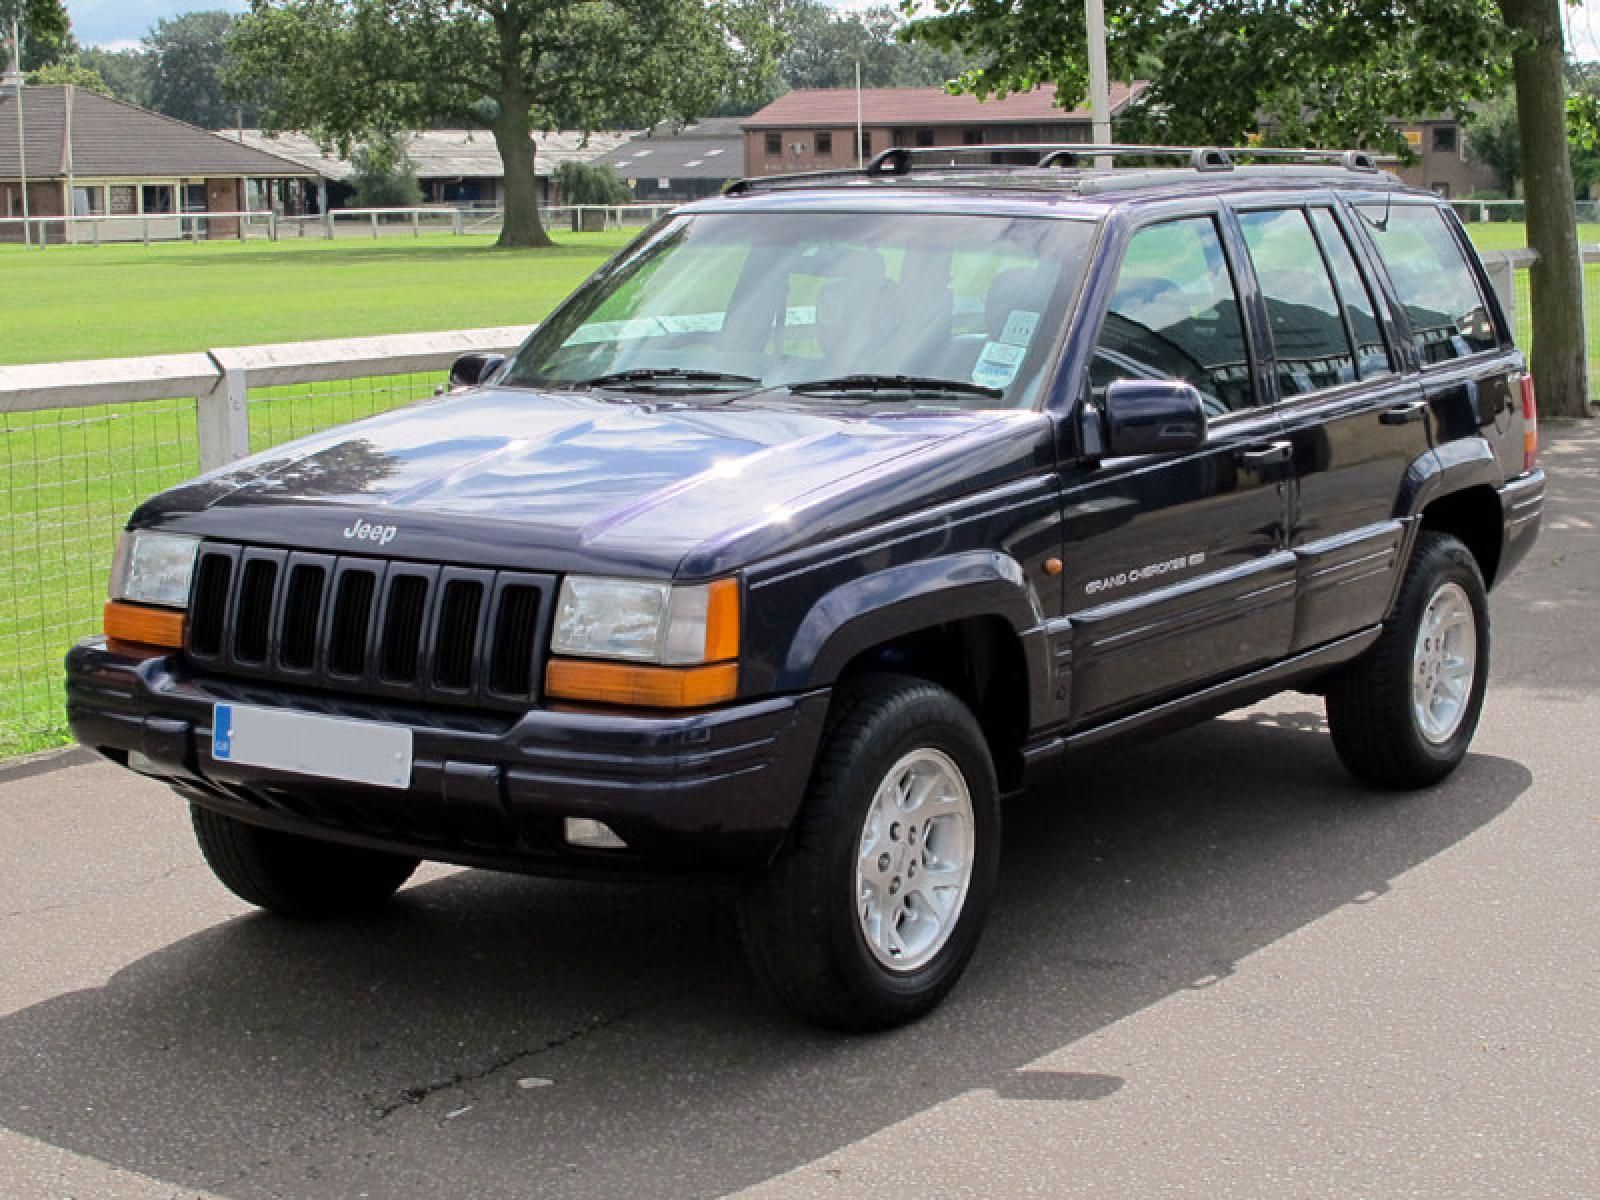 1998 Jeep Grand Cherokee 4wd Limited 5.9 060 Times, Top